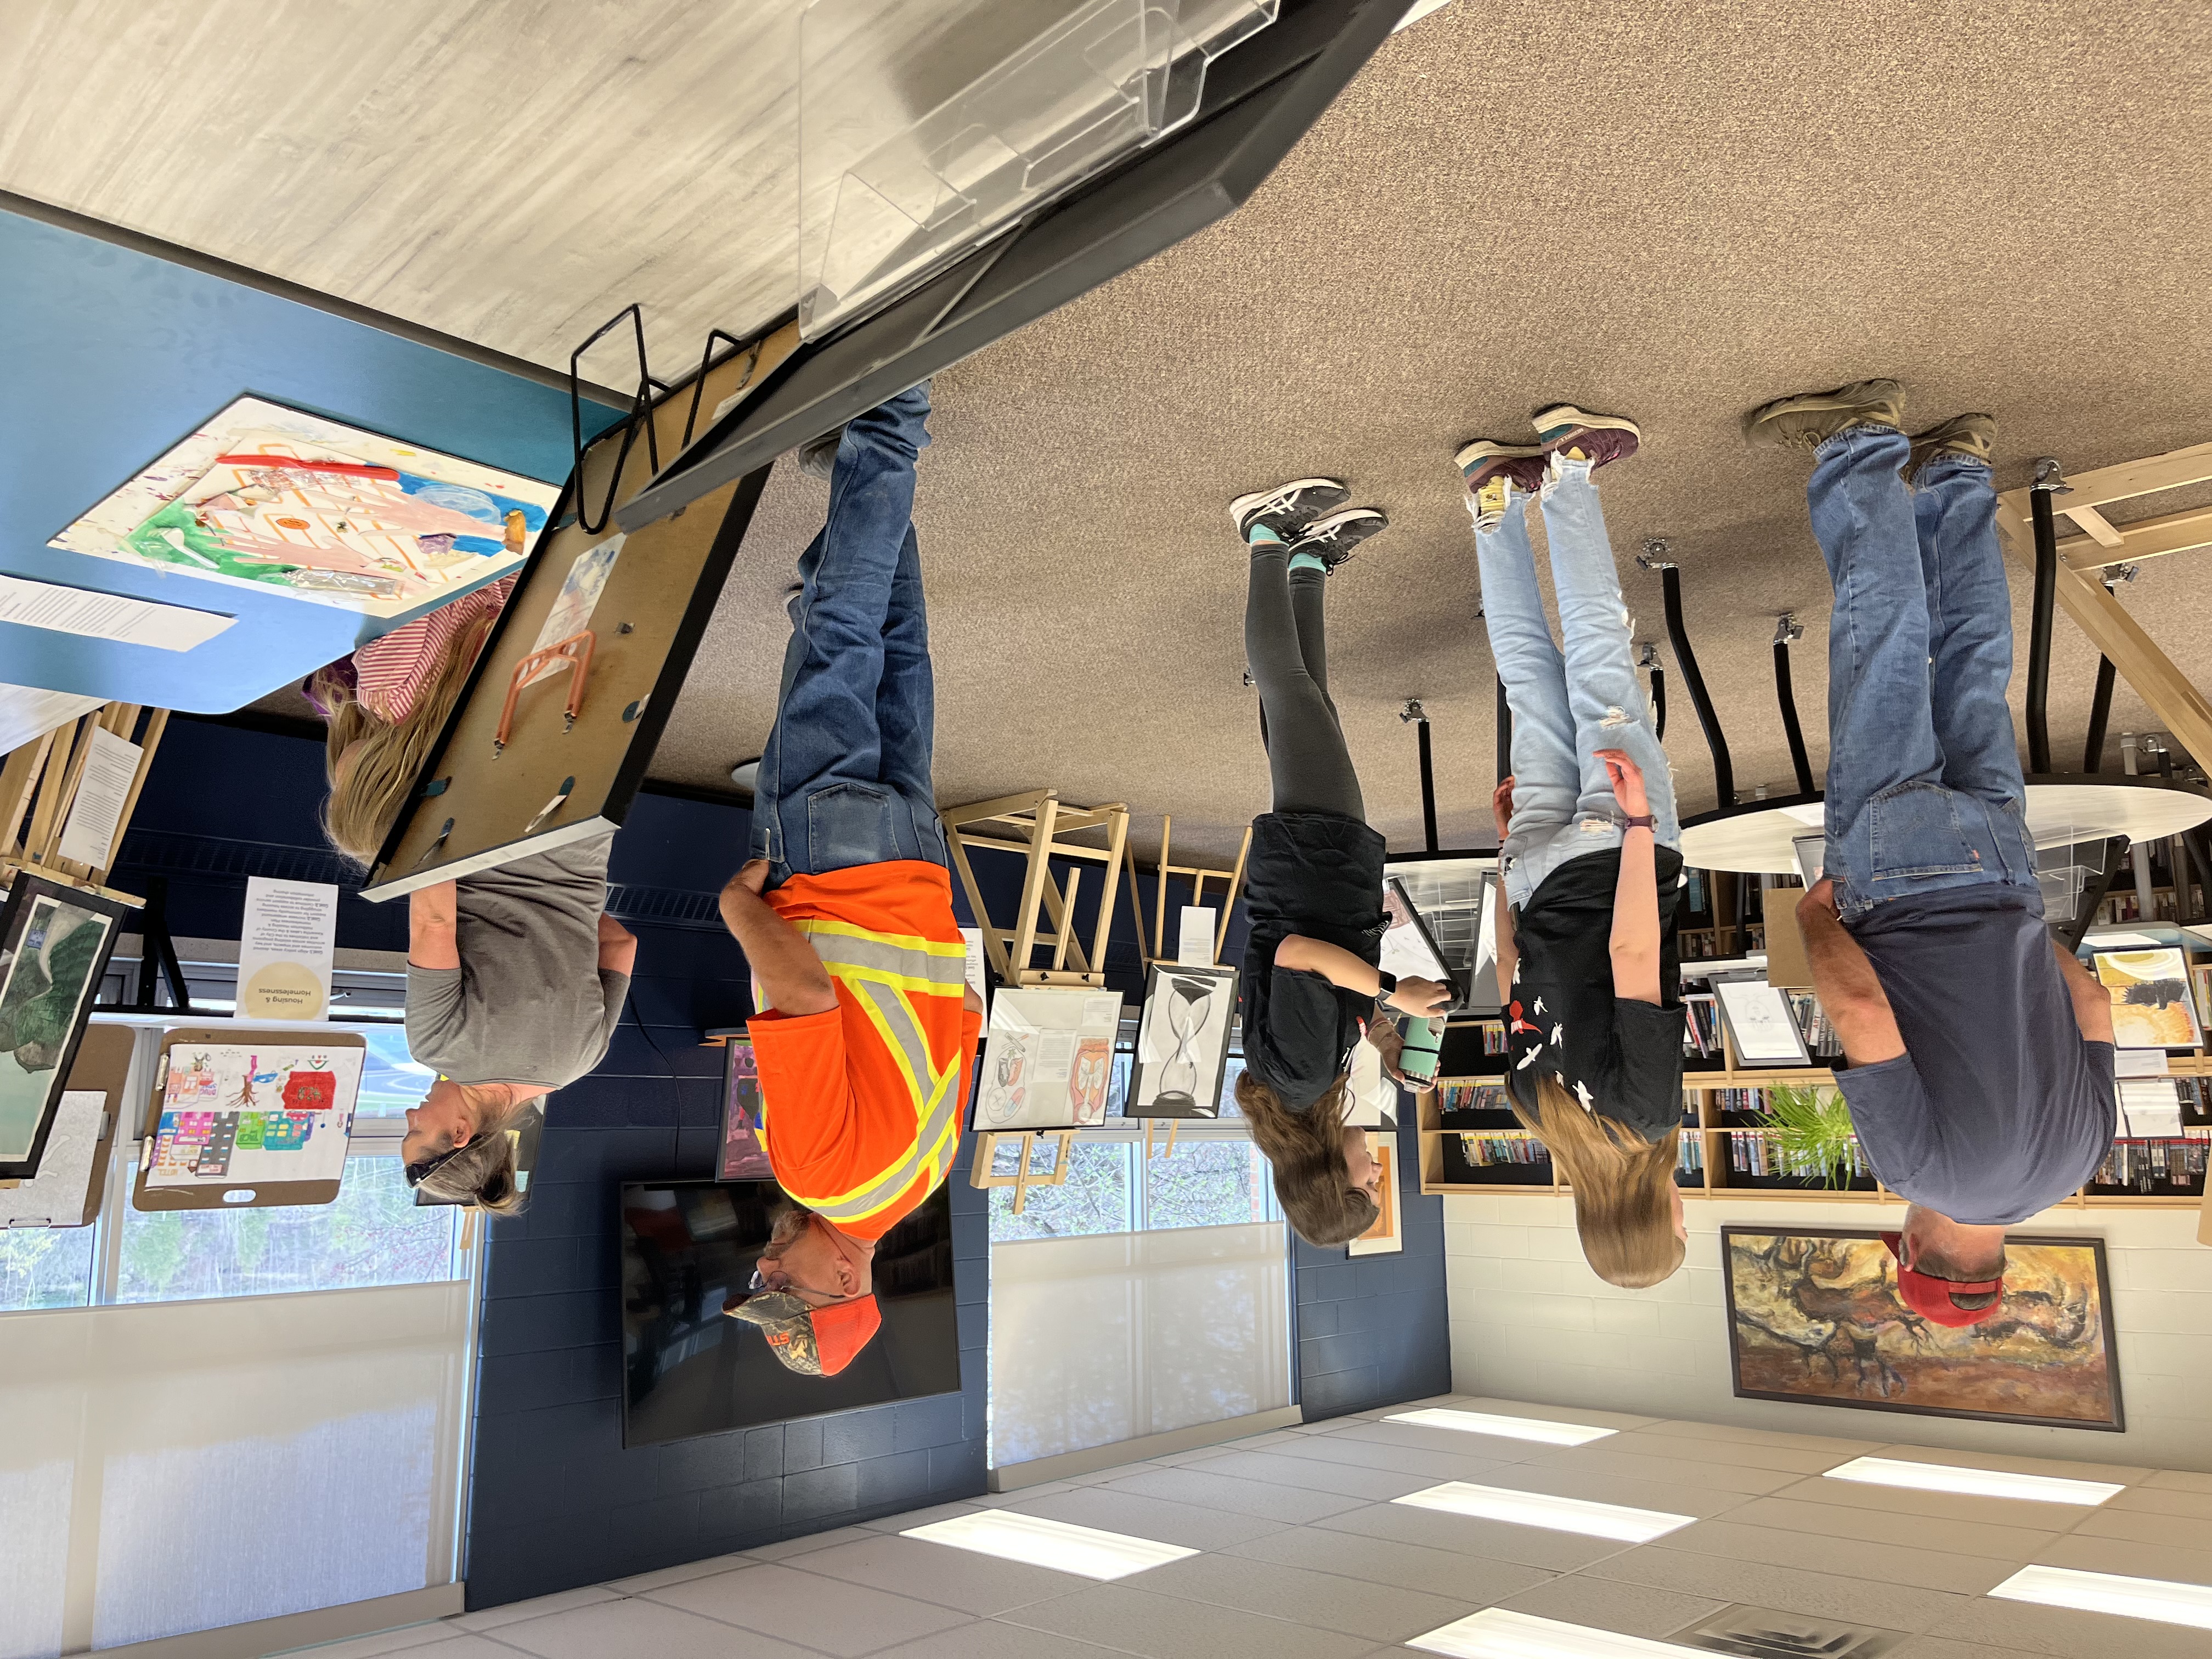 A view of the CSWB Youth Art Exhibition held at HHSS on May 10. Artwork arranged on easels can be seen in foreground and background. People around the room are looking at the artwork. 